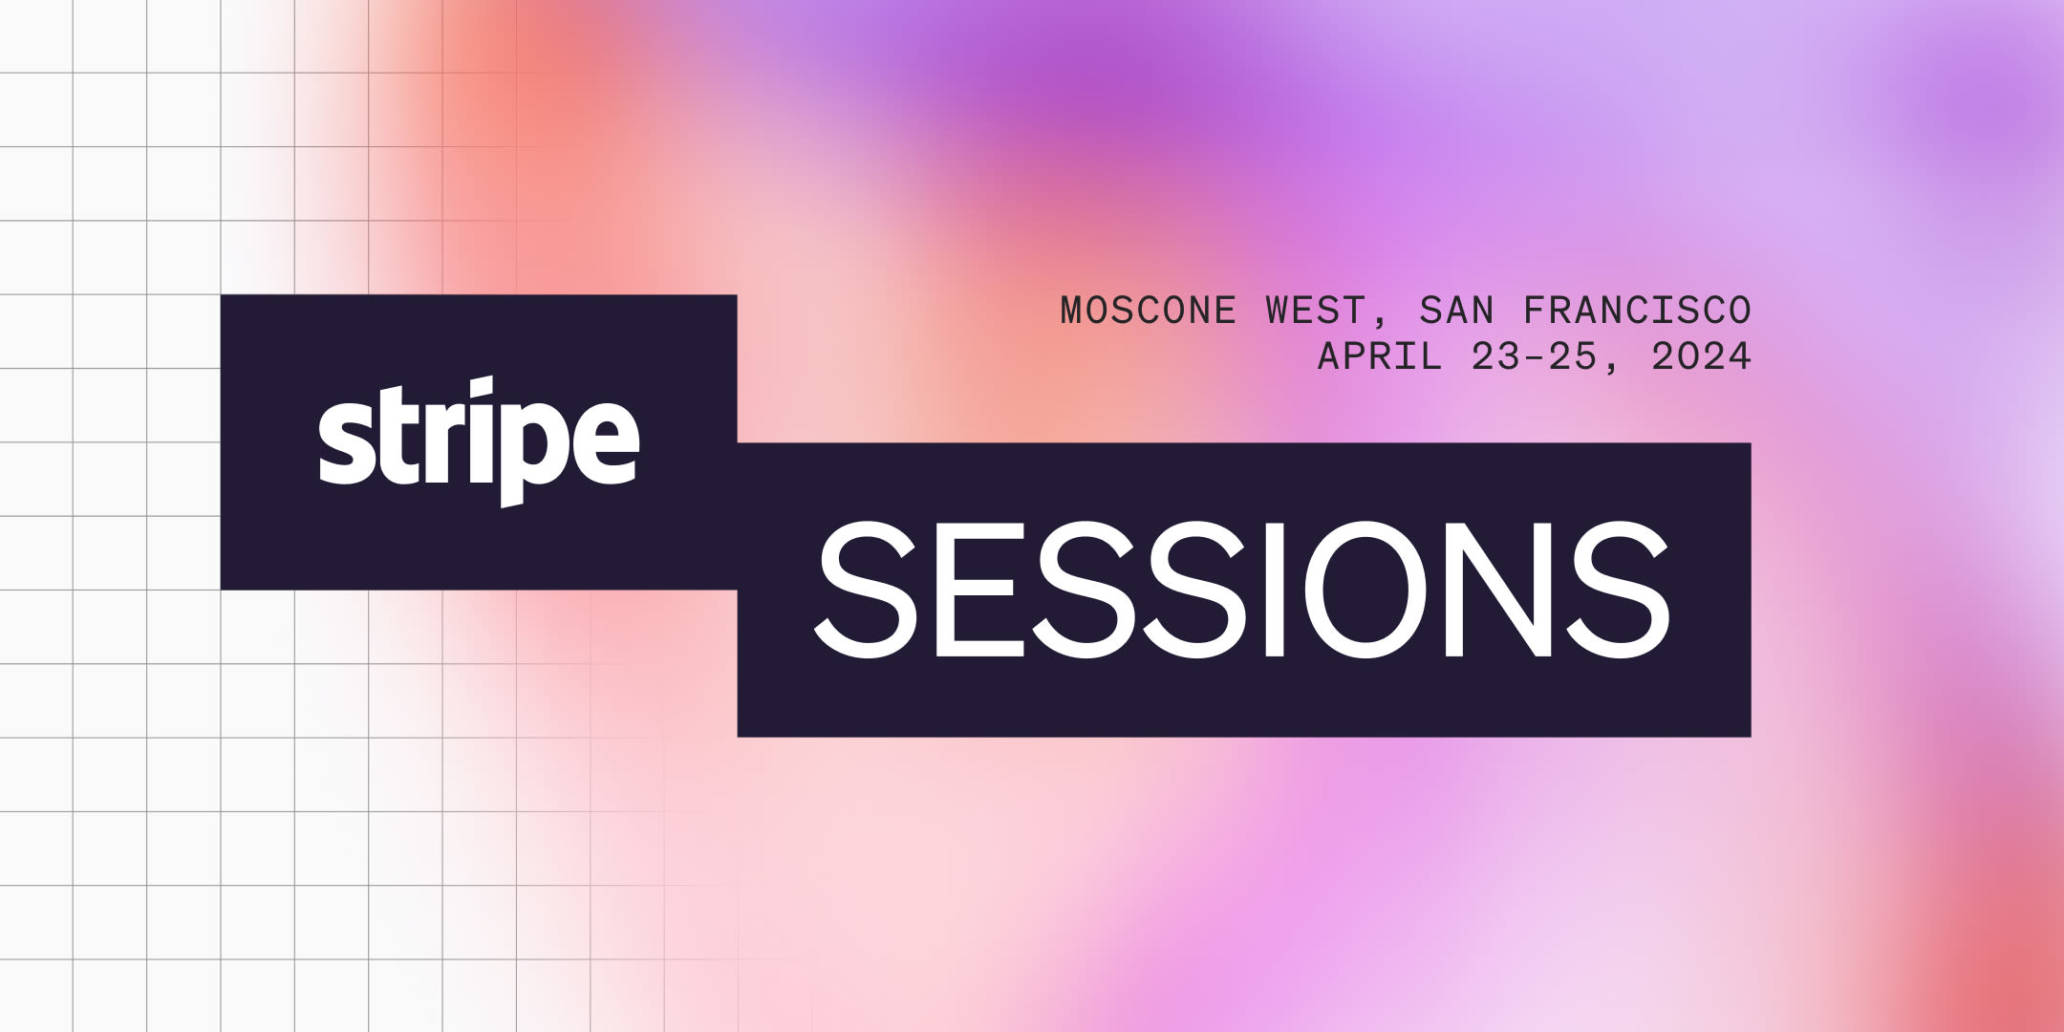 What Airwallex heard at Stripe Sessions 2024 and our reflections